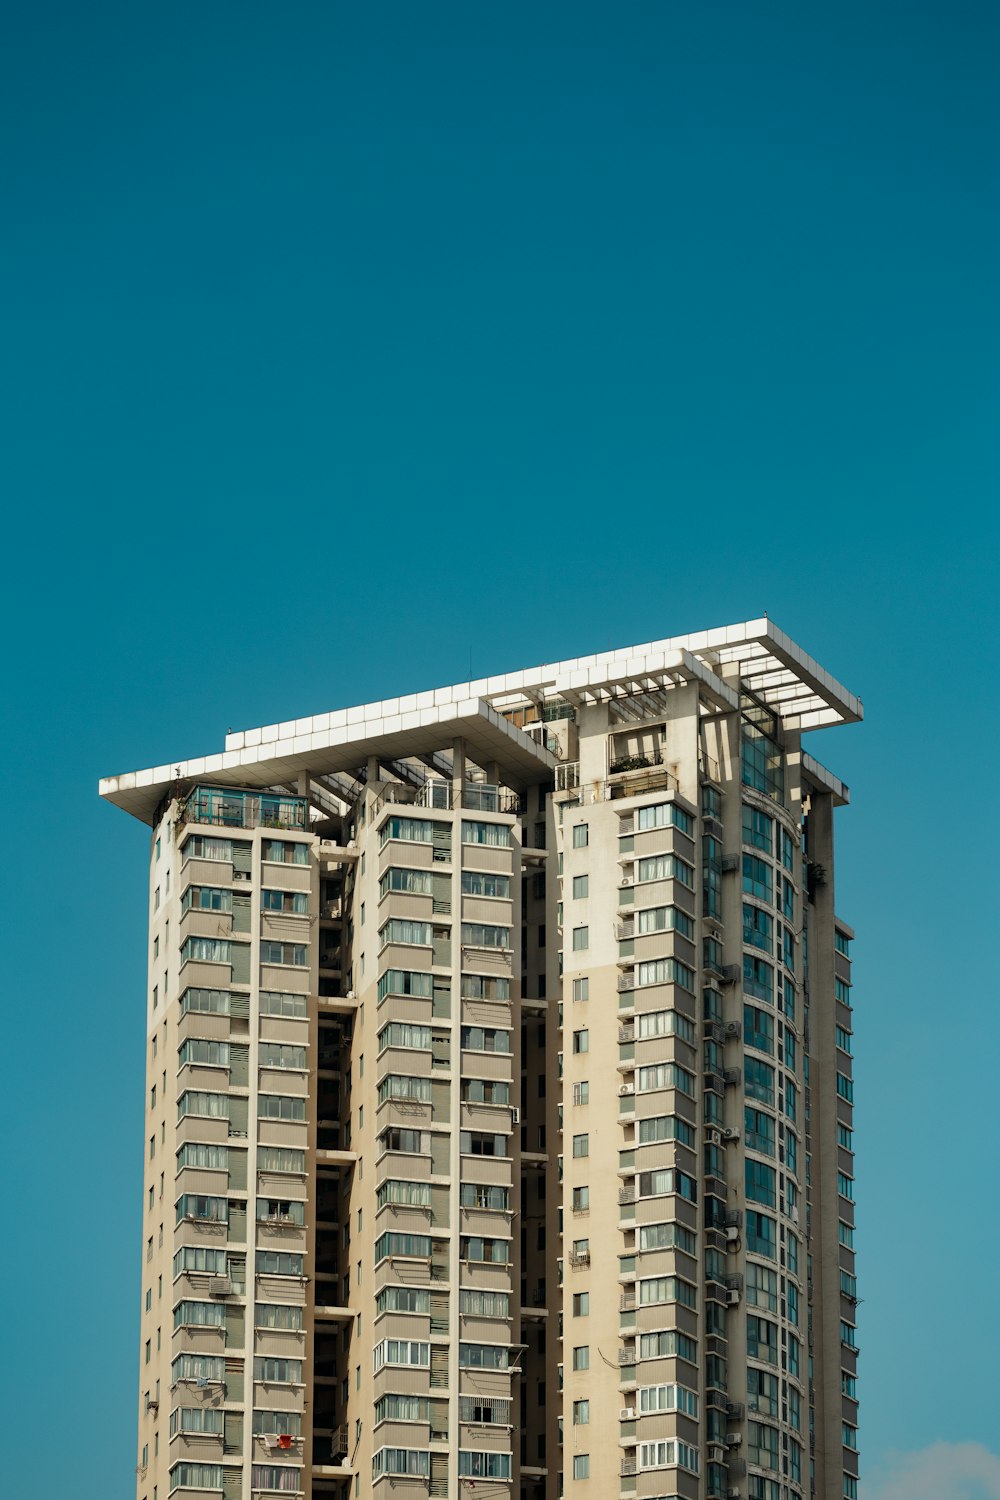 a tall building with balconies on top of it